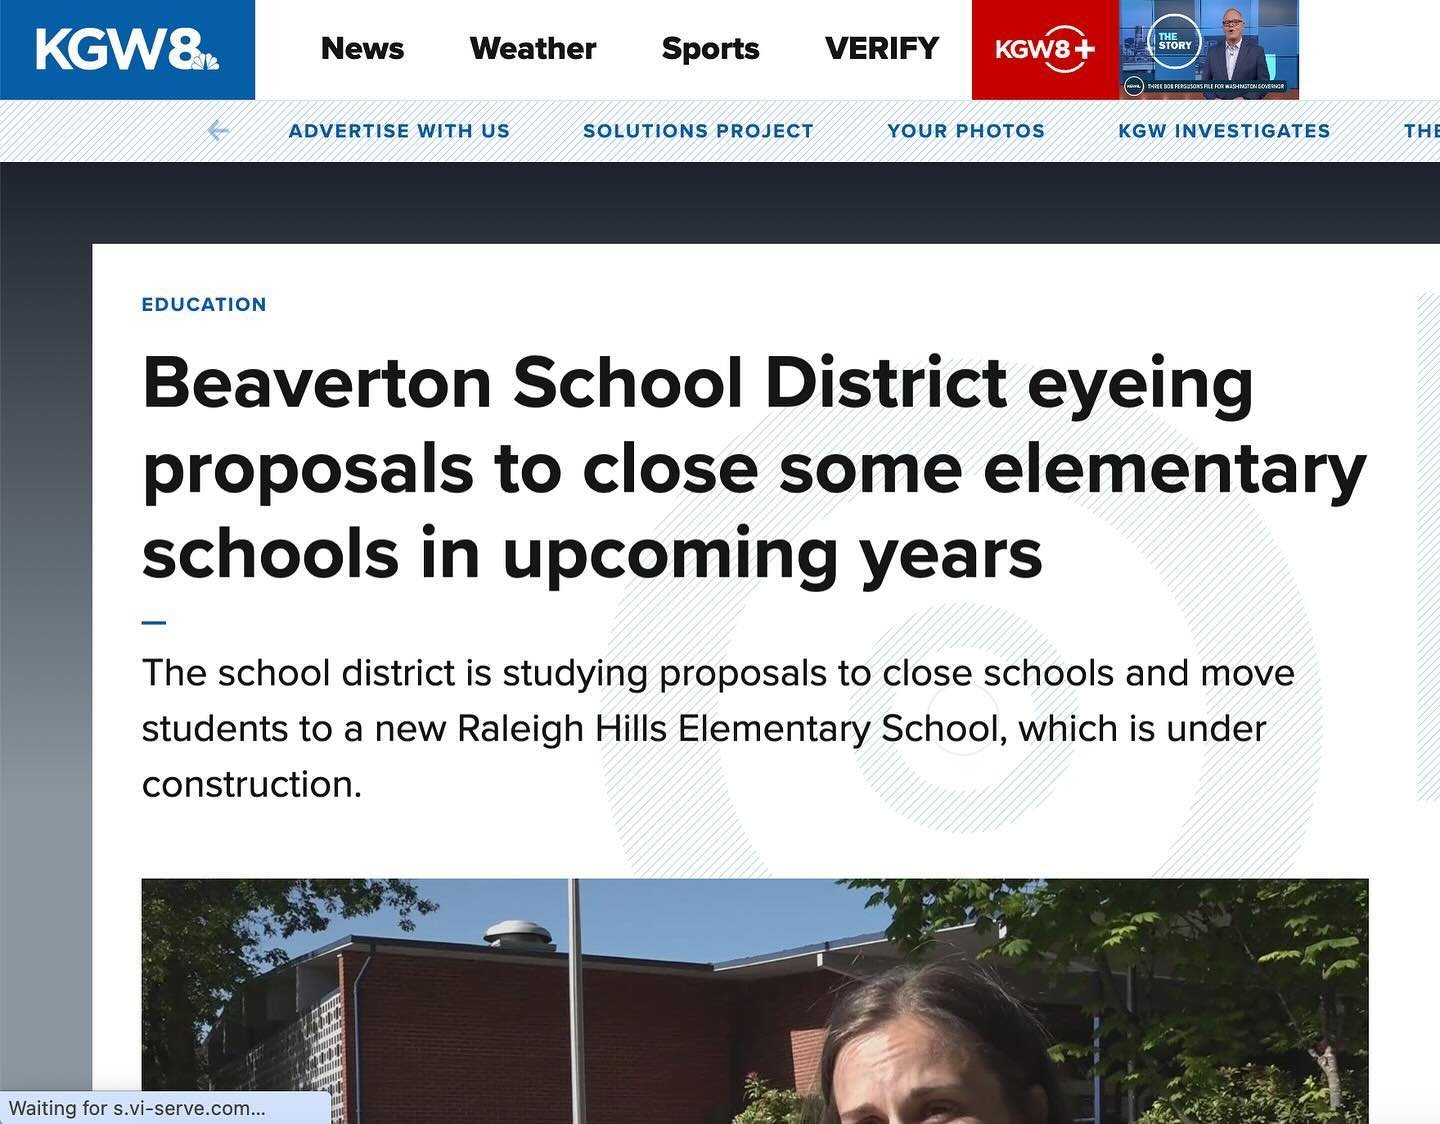 &quot;The potential closure is part of a proposal to fill a new Raleigh Hills Elementary School in hopes of increasing building capacity&quot;

Thank you KGW for the coverage!